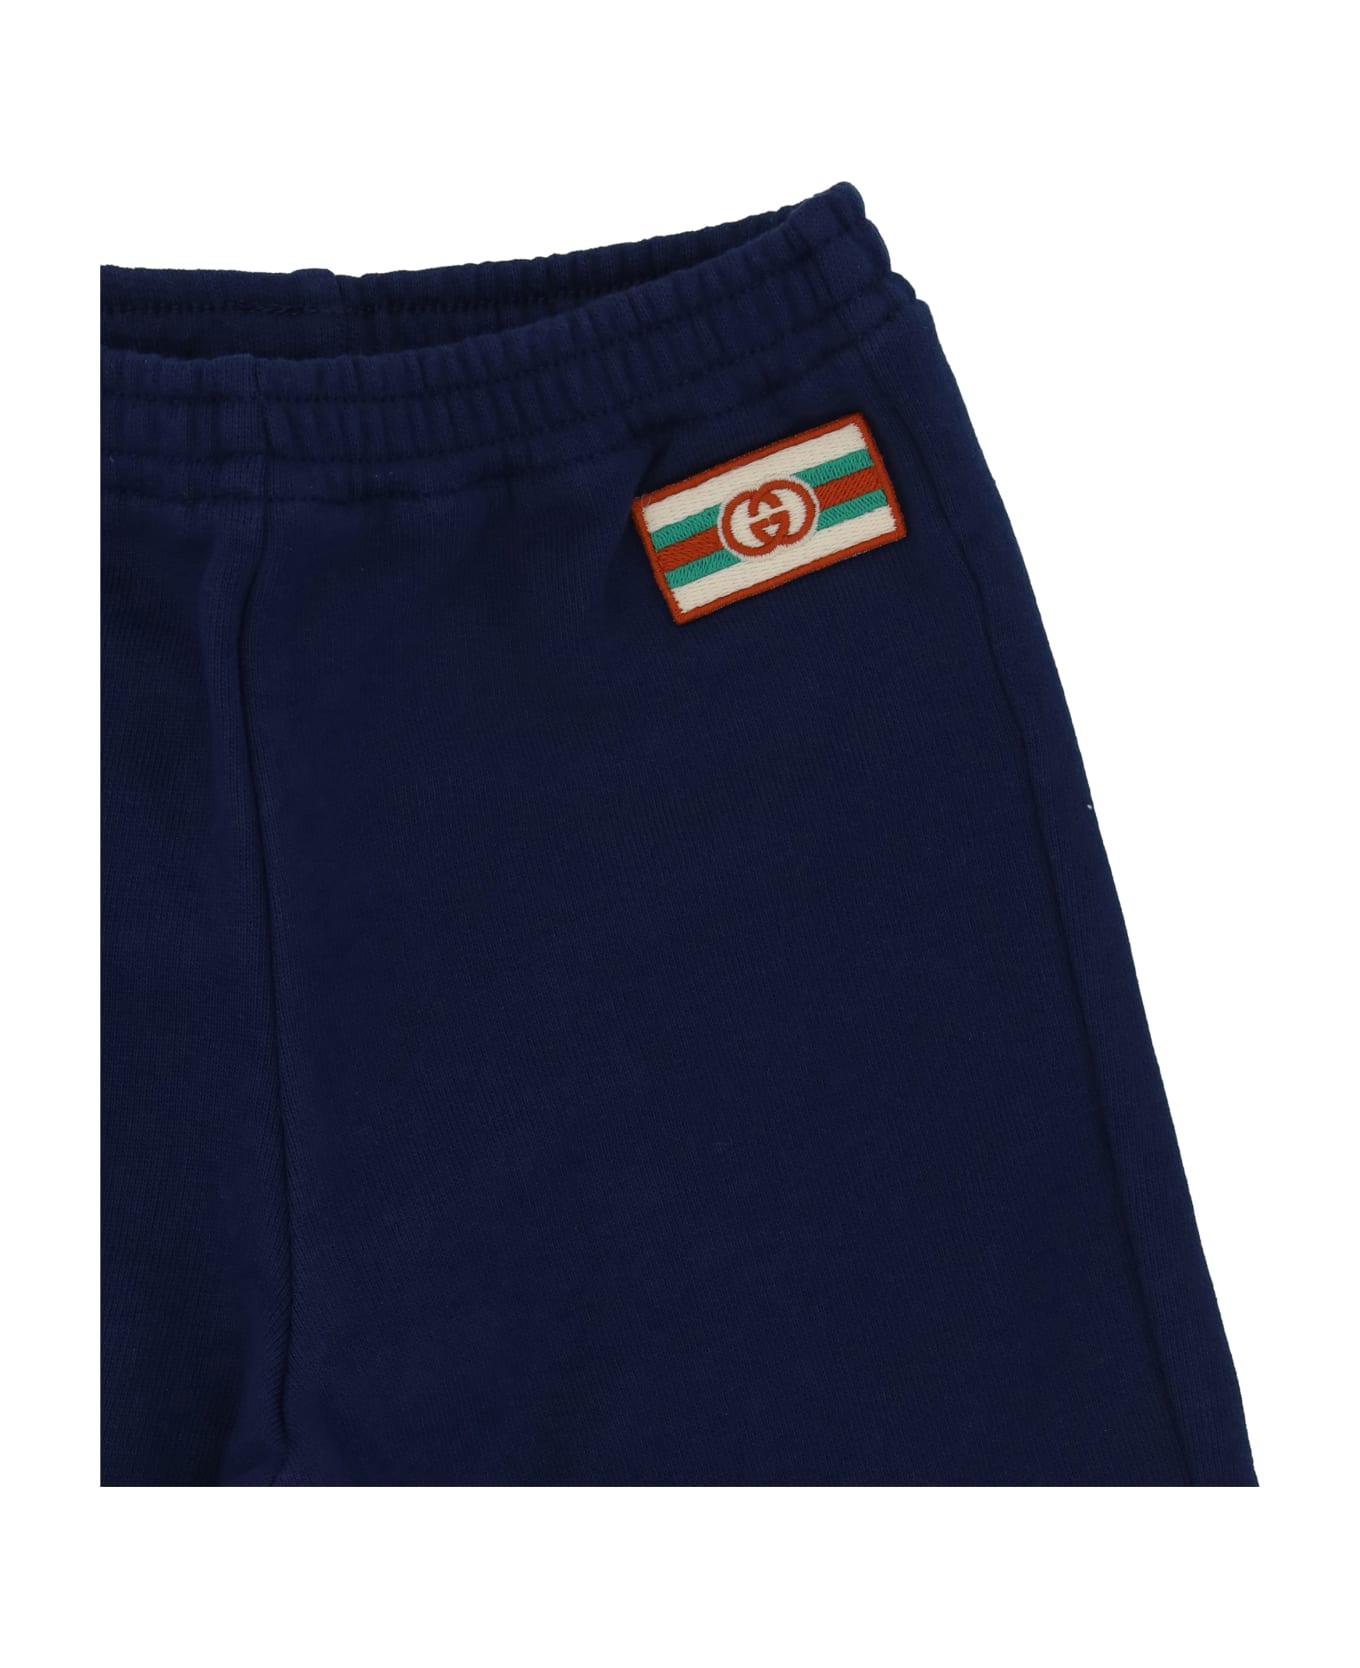 Gucci Pants For Boy - Prussian Blue